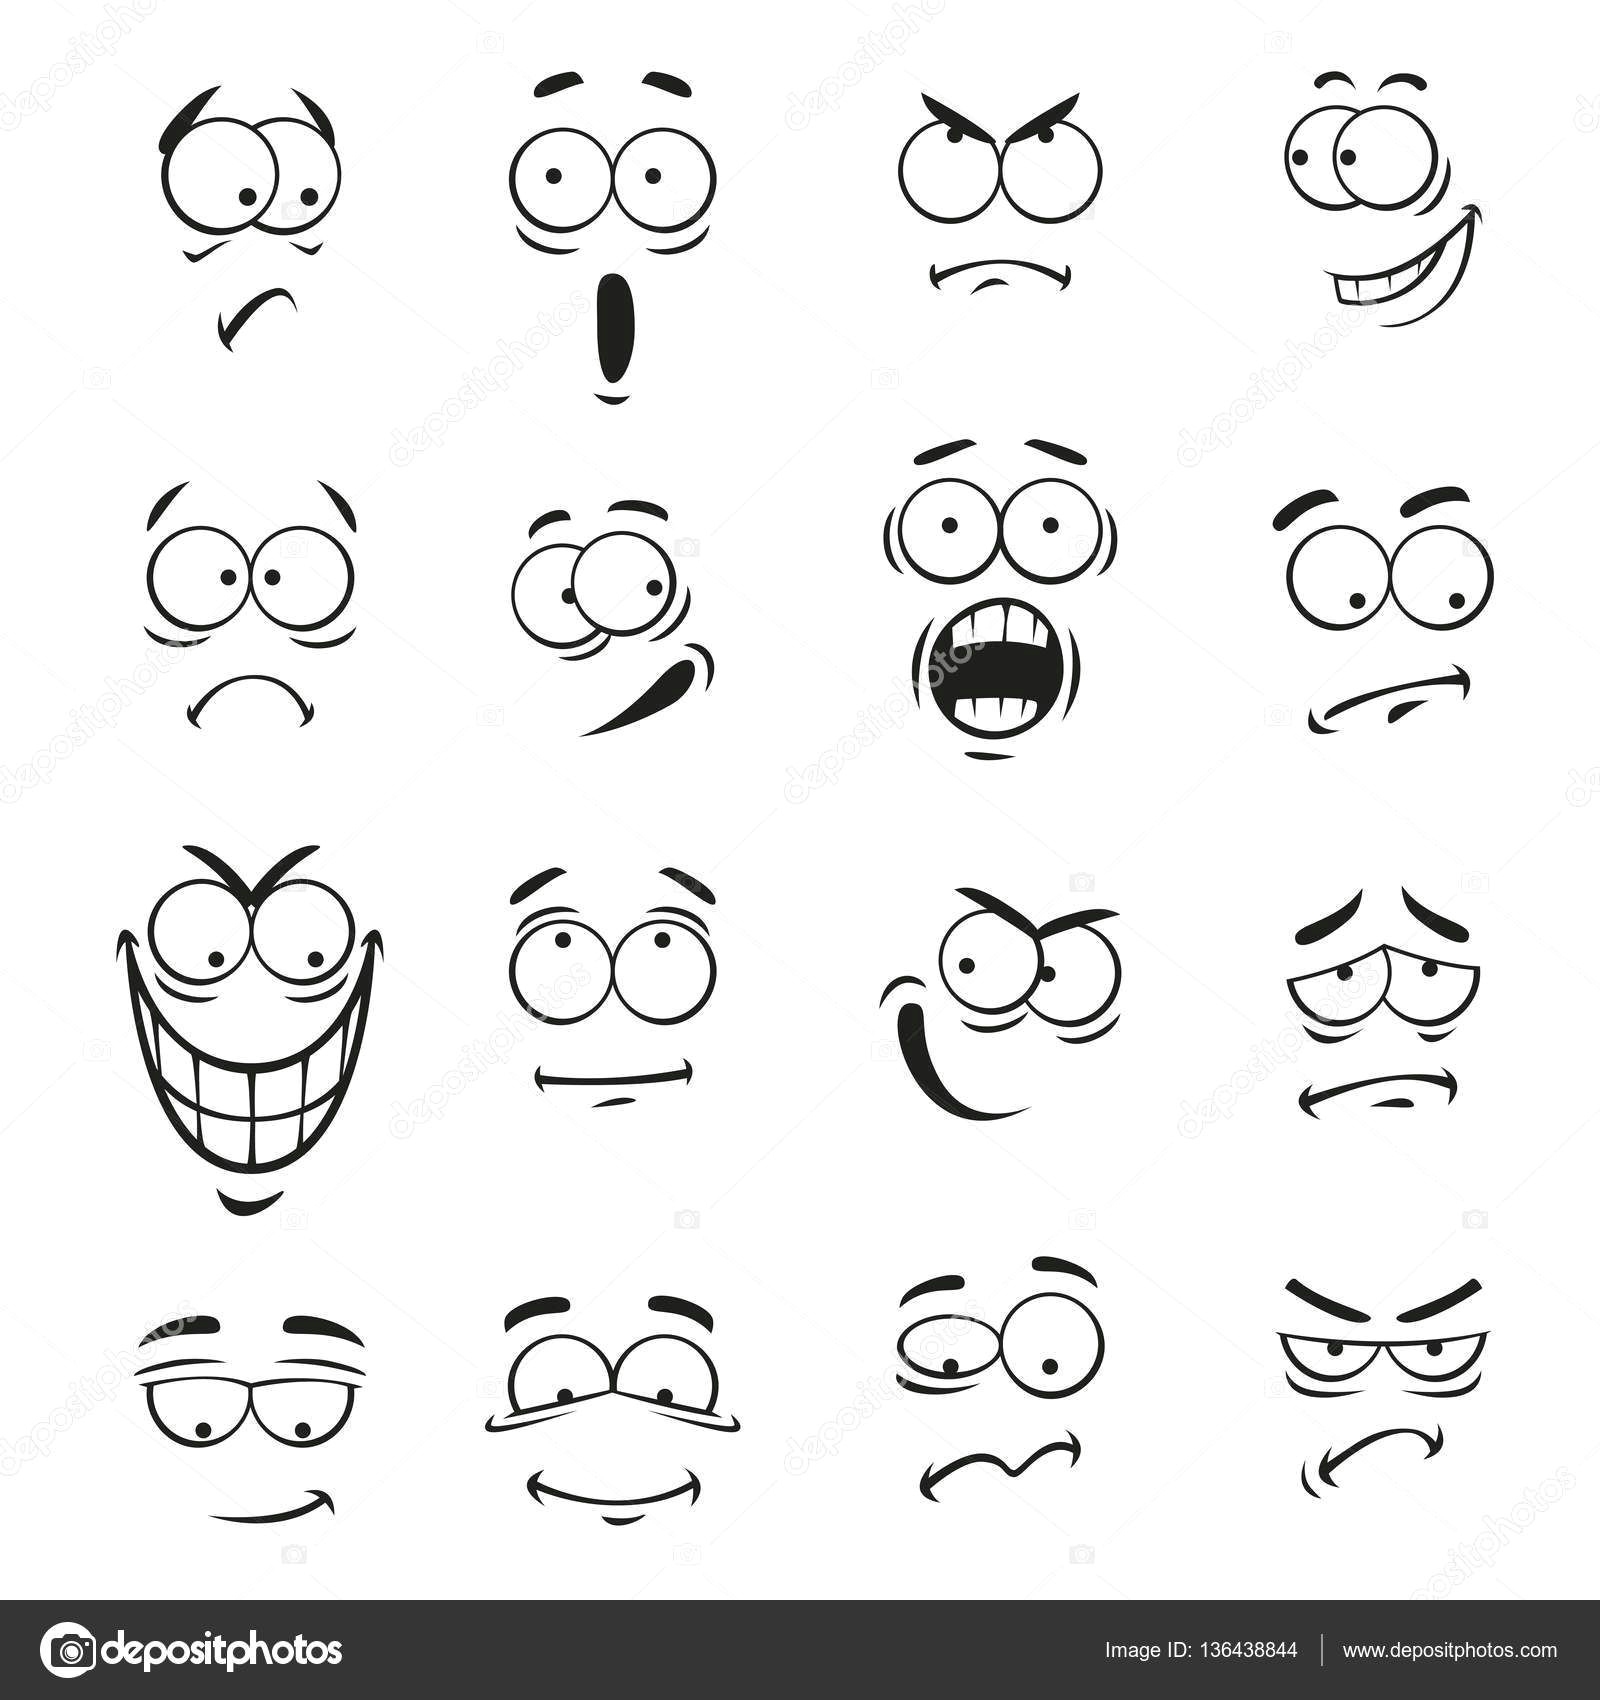 Drawing Cartoon Eye Expressions Related Image Character X Press Cartoon Emoticon Emoticon Faces